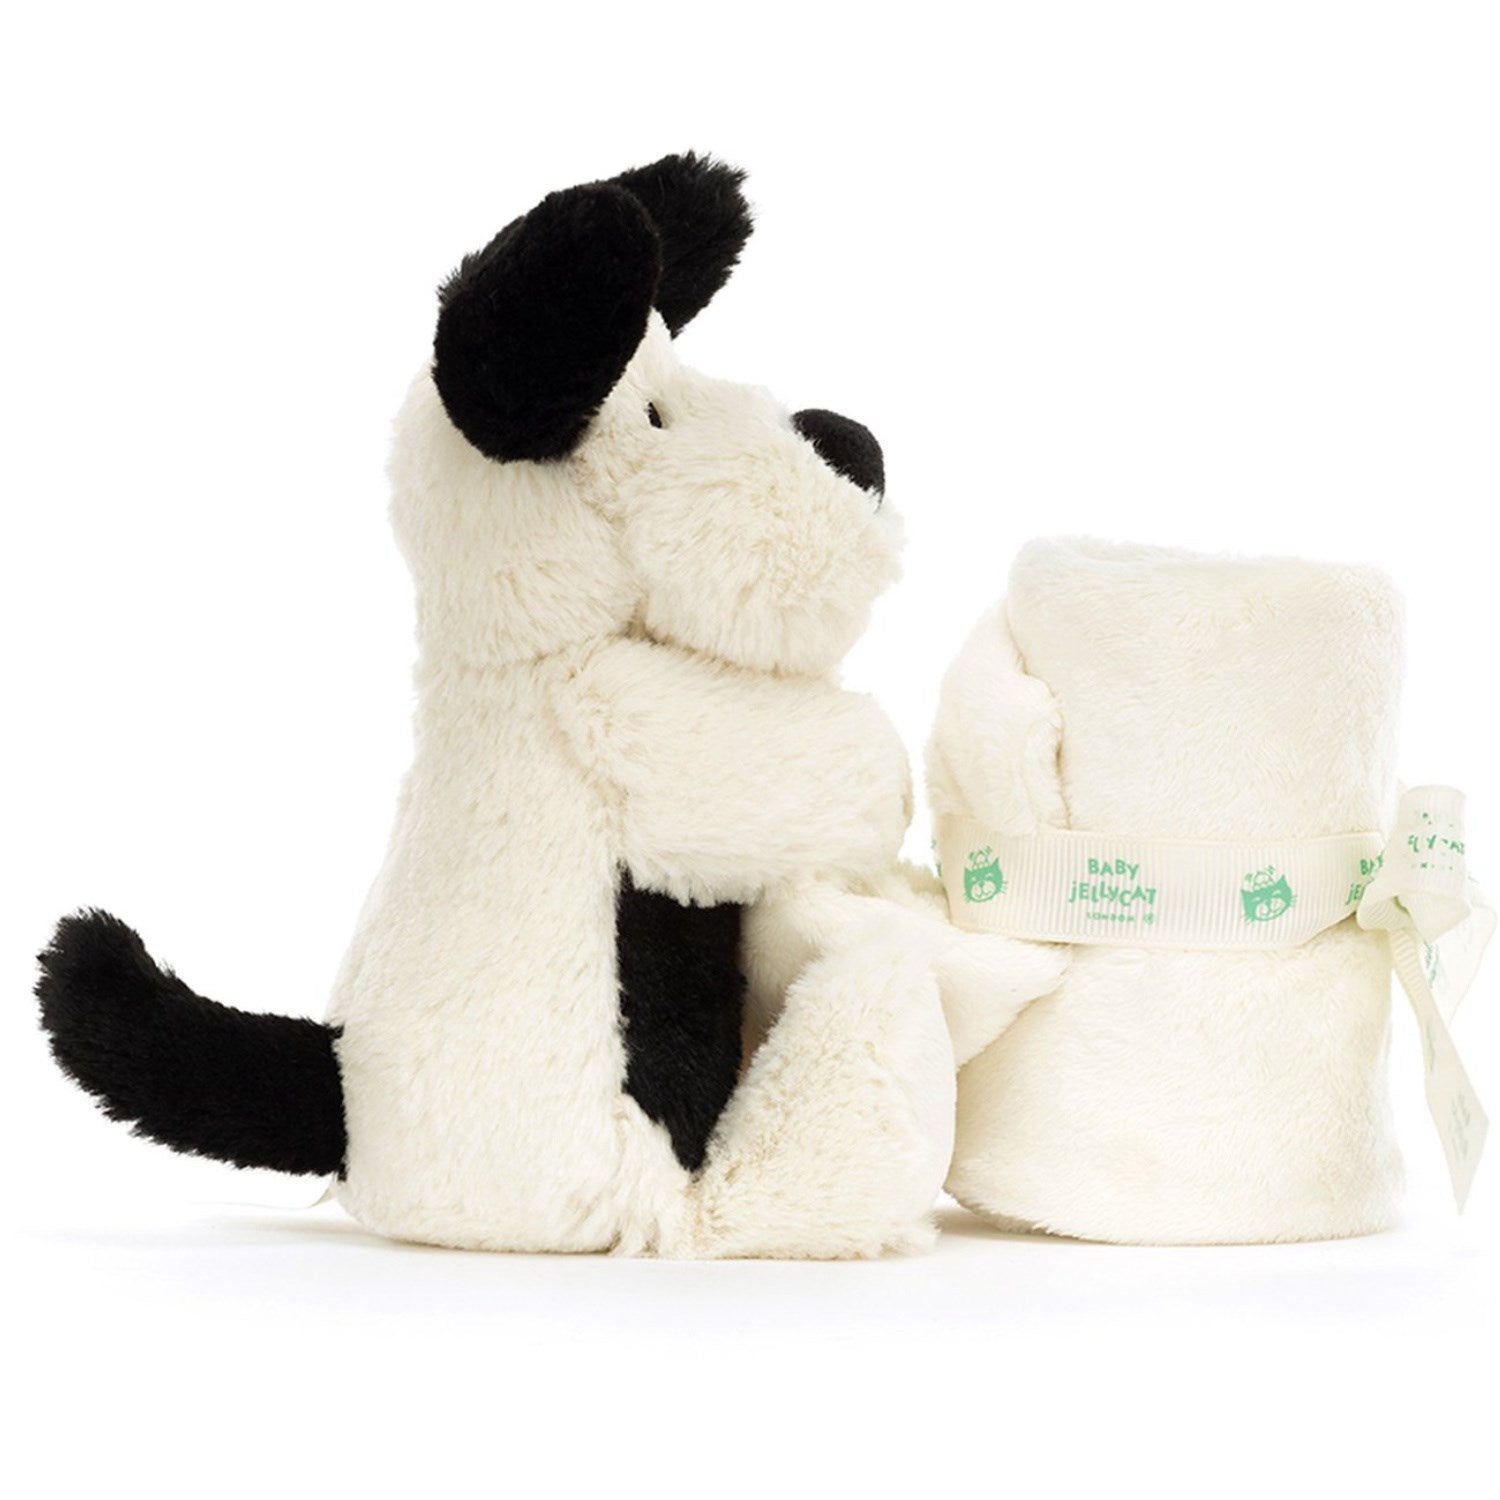 Jellycat Bashful Black & Cream Puppy Soother 4